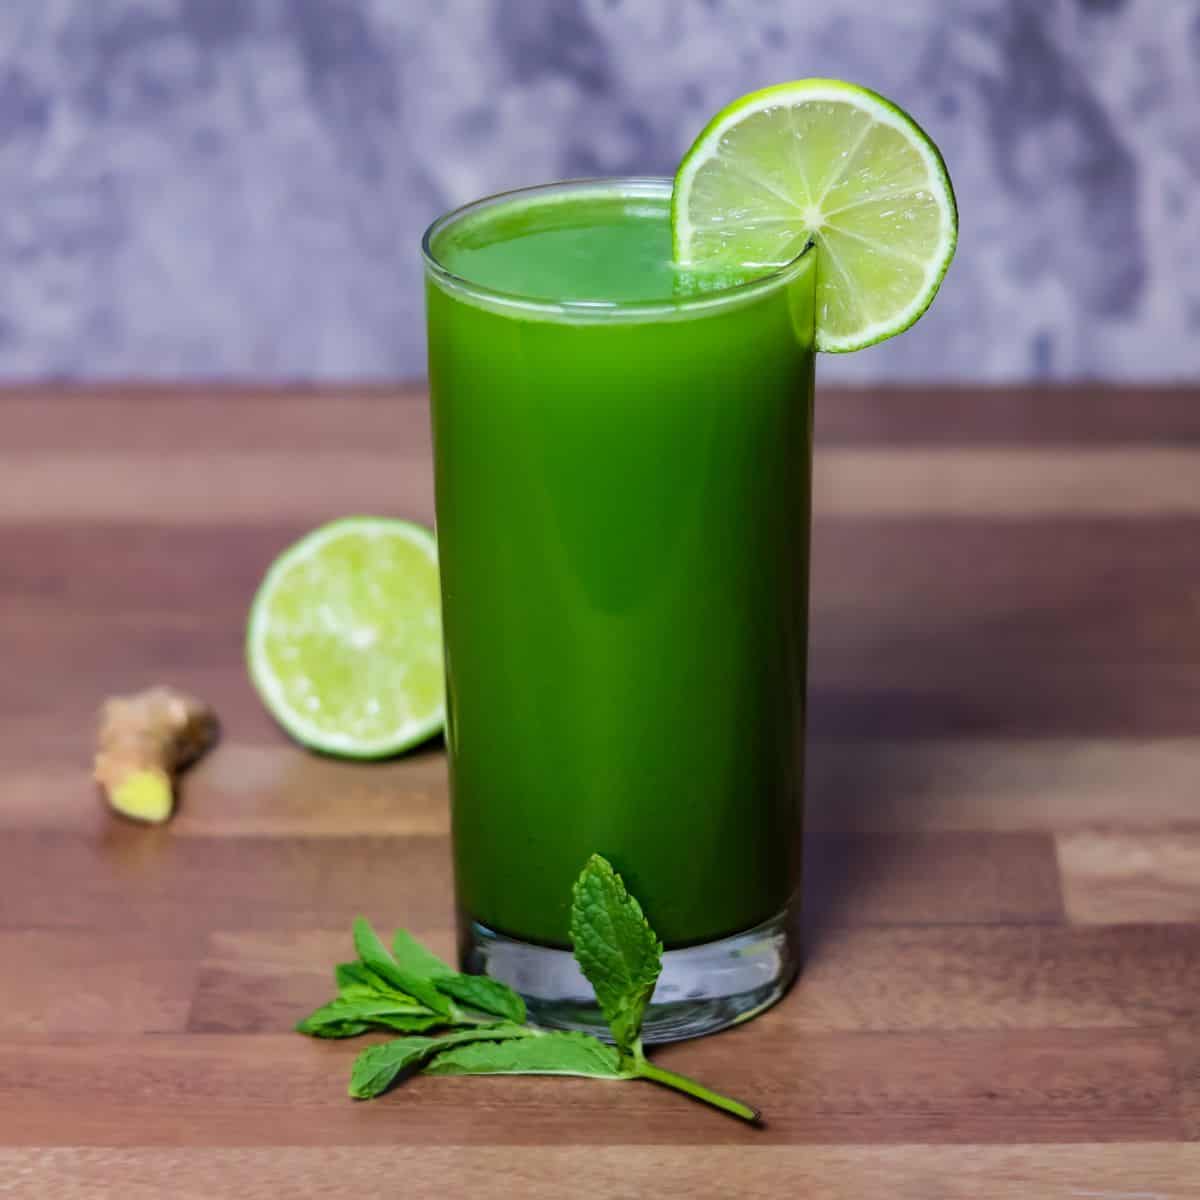 A glass of vibrant green cucumber juice garnished with a slice of lime, with fresh mint leaves, a piece of ginger, and a halved lime in the background.